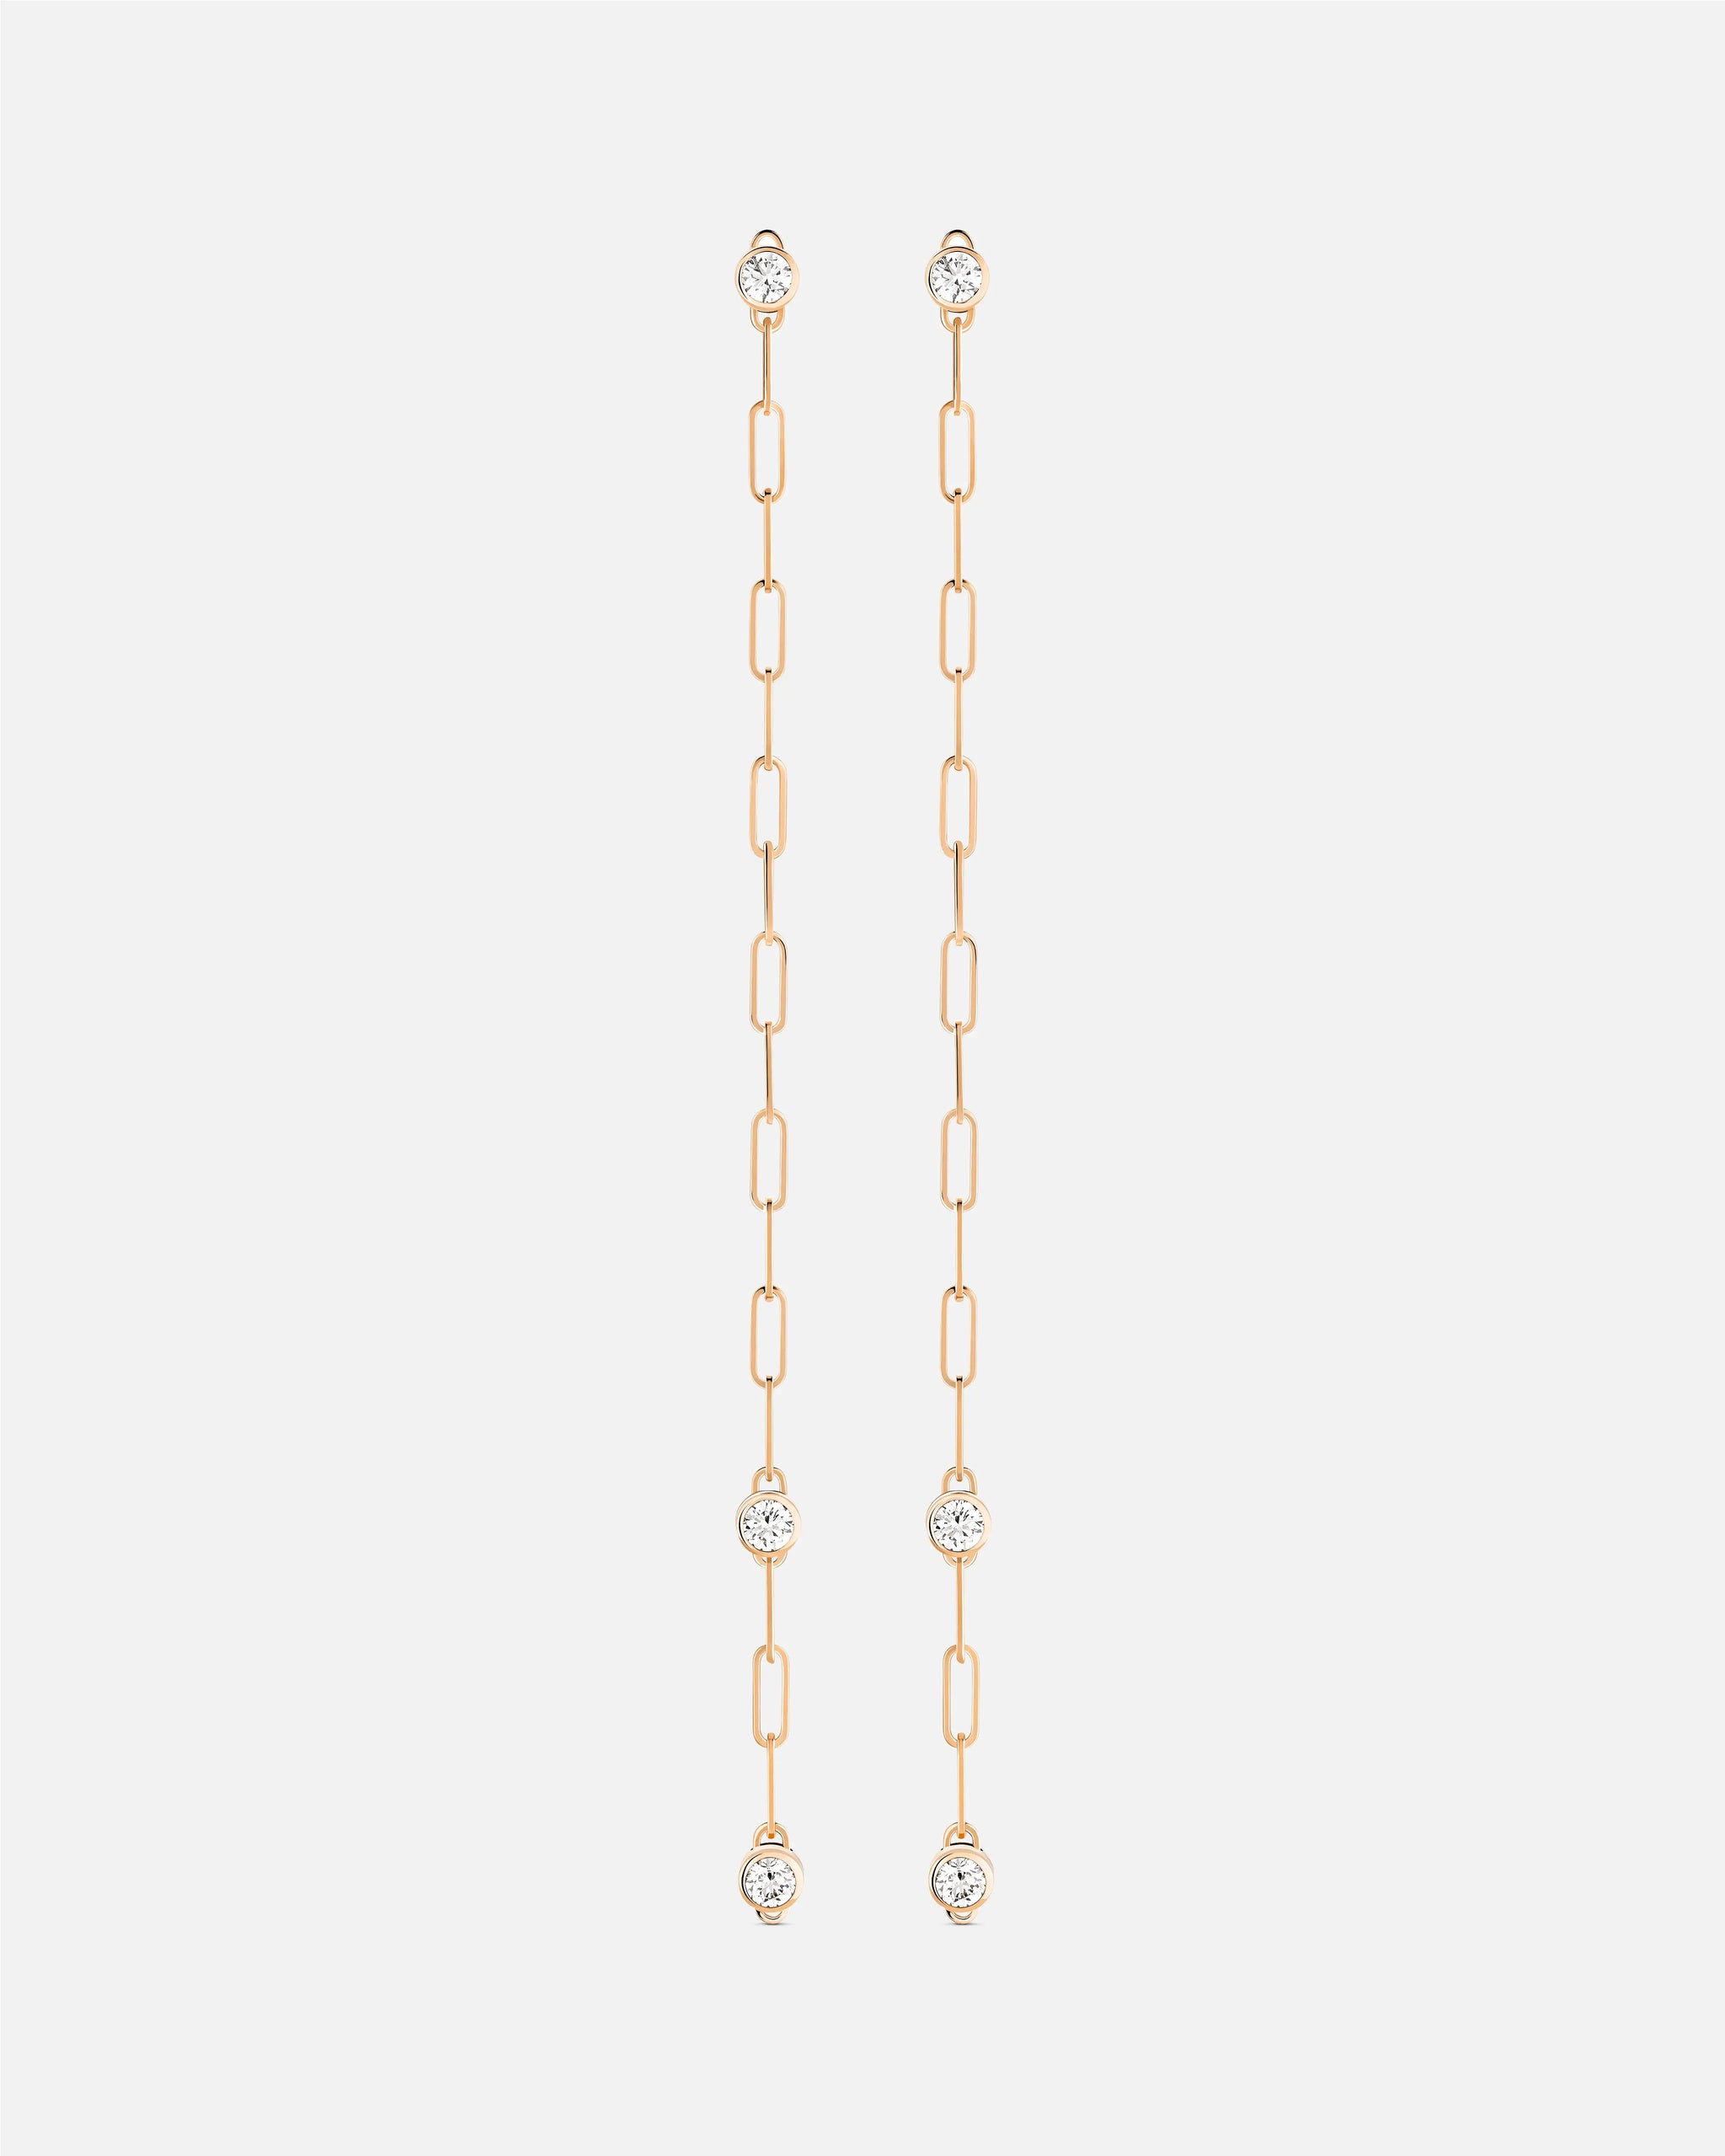 Round Trio GM Classics Earrings in Rose Gold - 1 - Nouvel Heritage